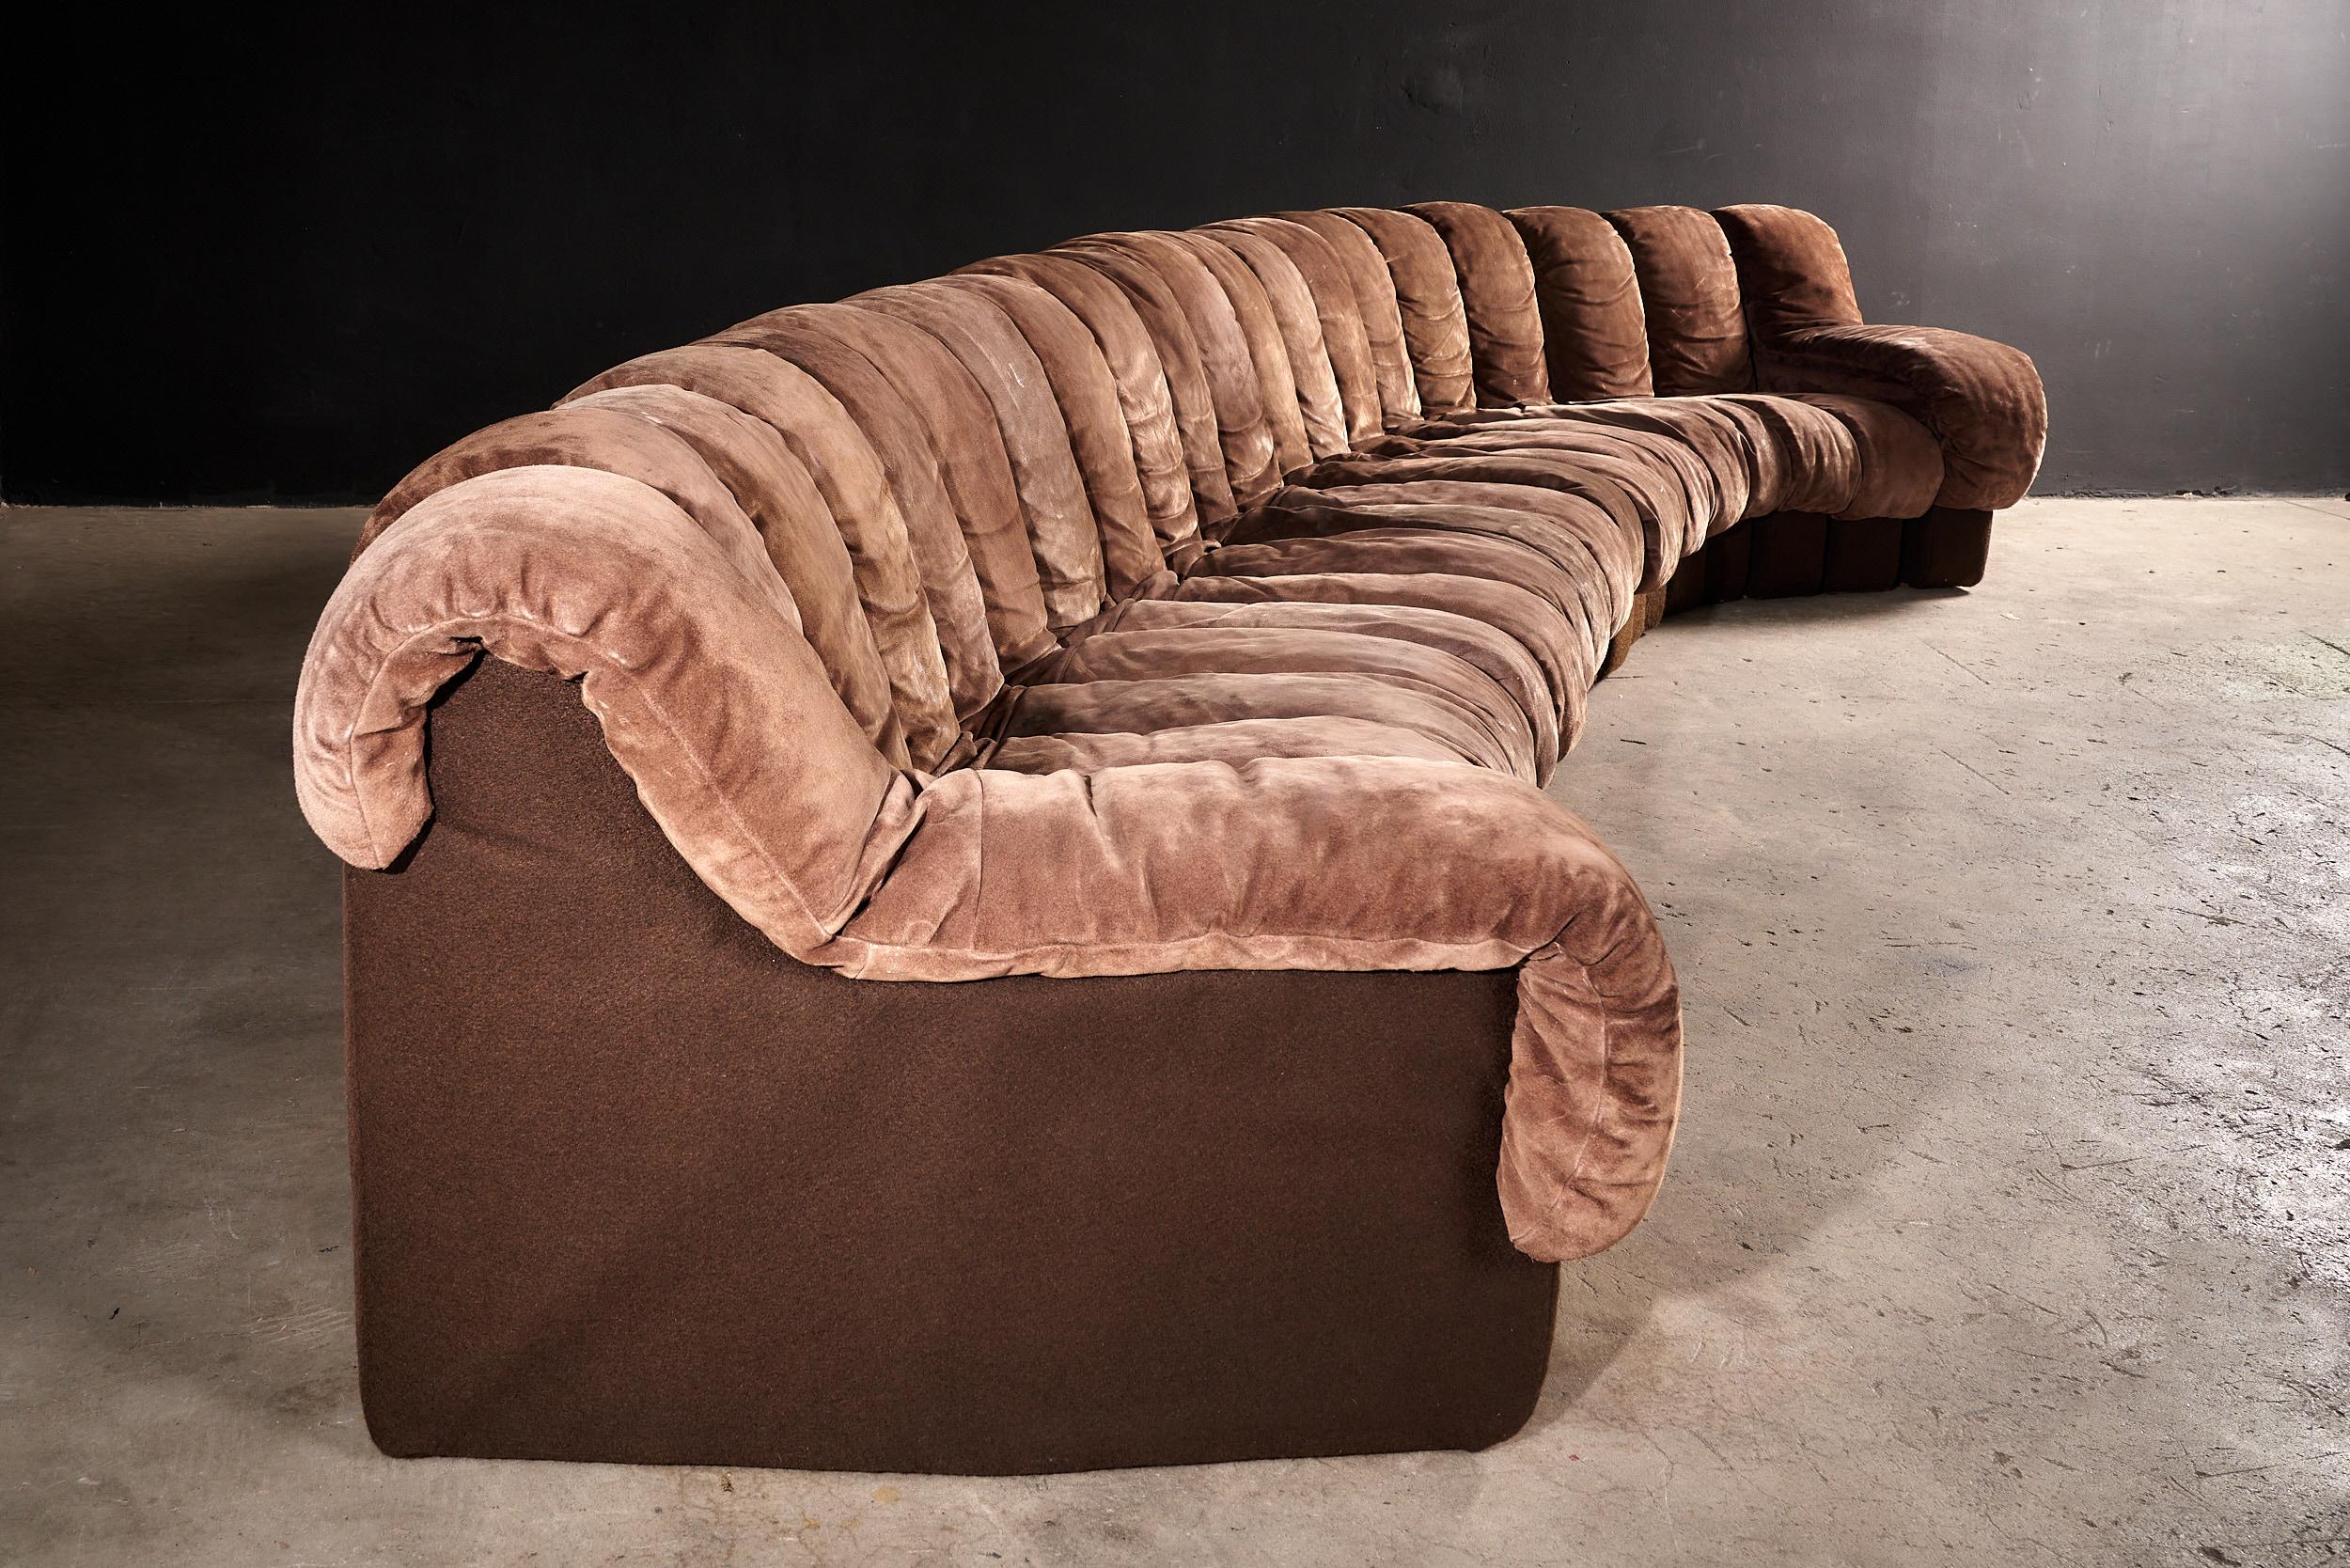 DS600 Modular Non Stop Sofa by Ueli Berger for De Sede. Set of 20 Pieces For Sale 8